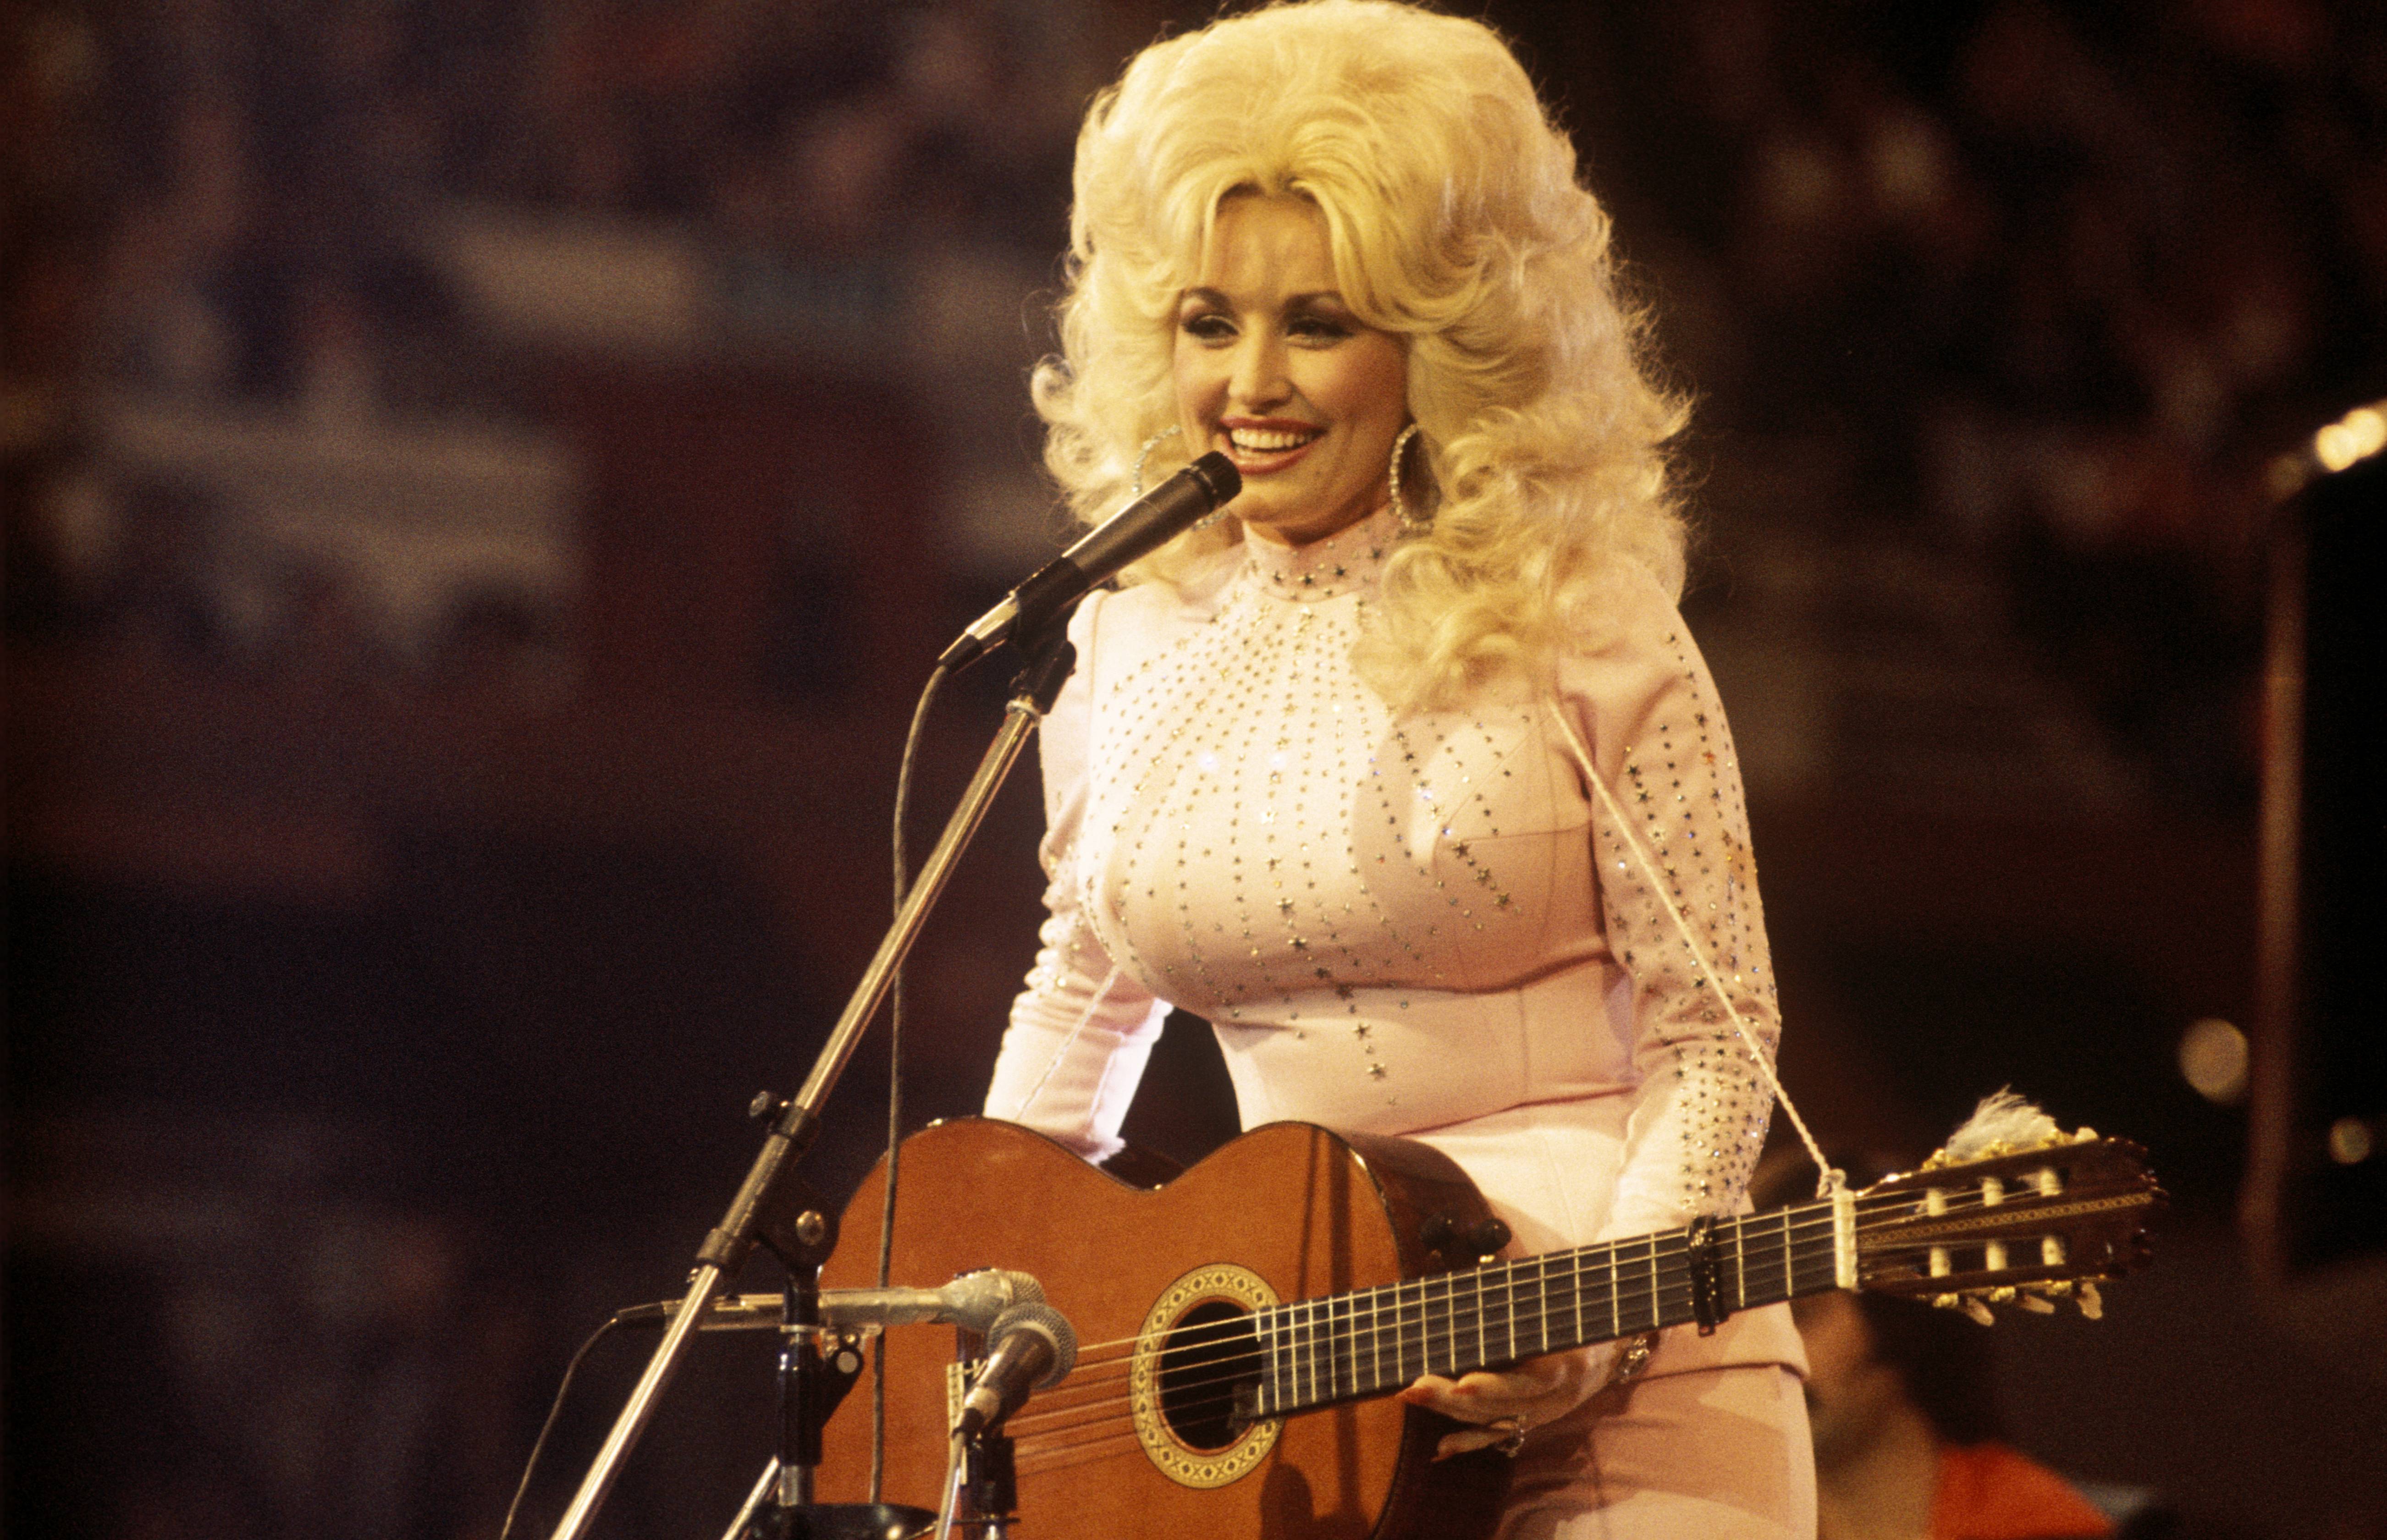 Dolly Parton performs with a guitar on stage in 1976.